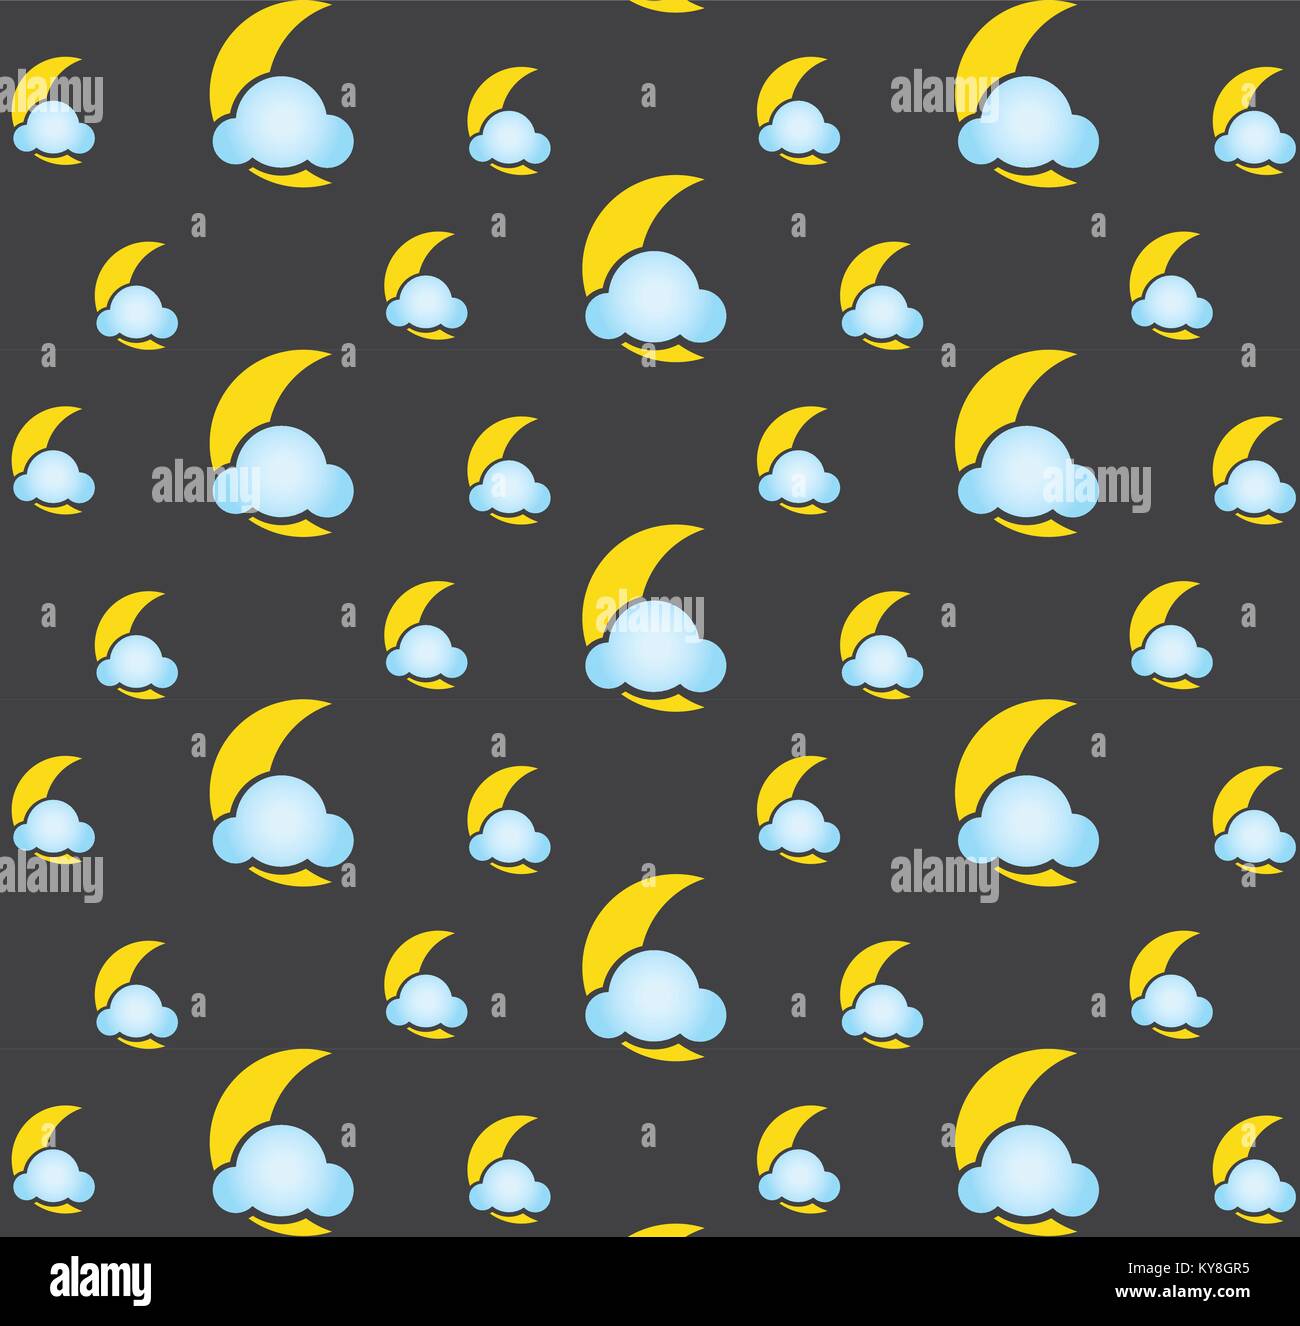 Moon and clouds icon pattern background ,Vector illustration background. Stock Vector